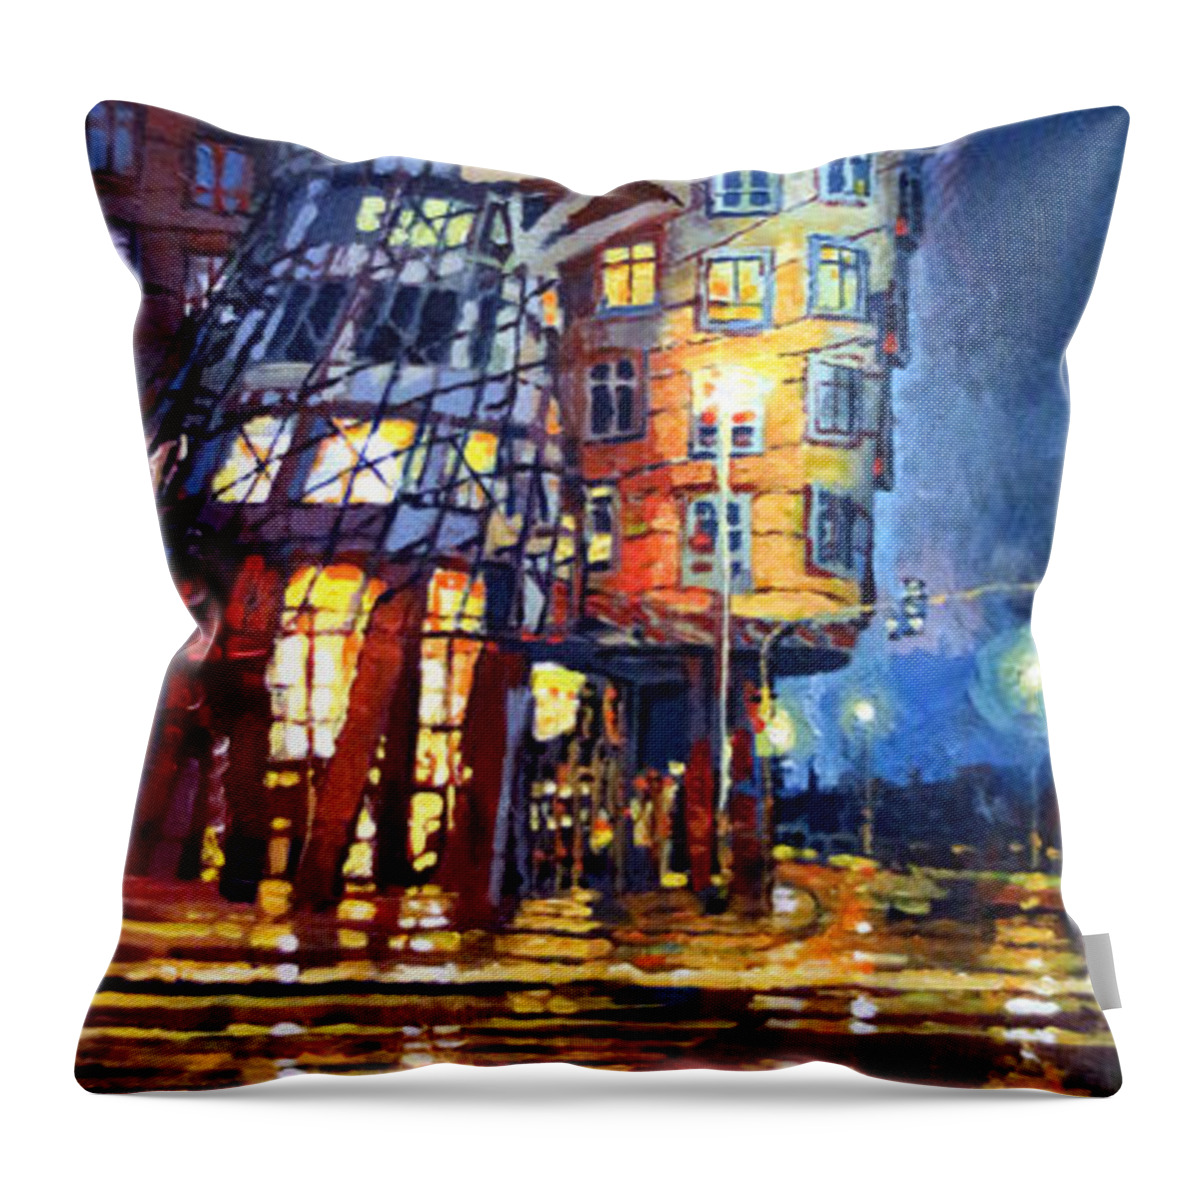 Oil Throw Pillow featuring the painting Prague Dancing House by Yuriy Shevchuk